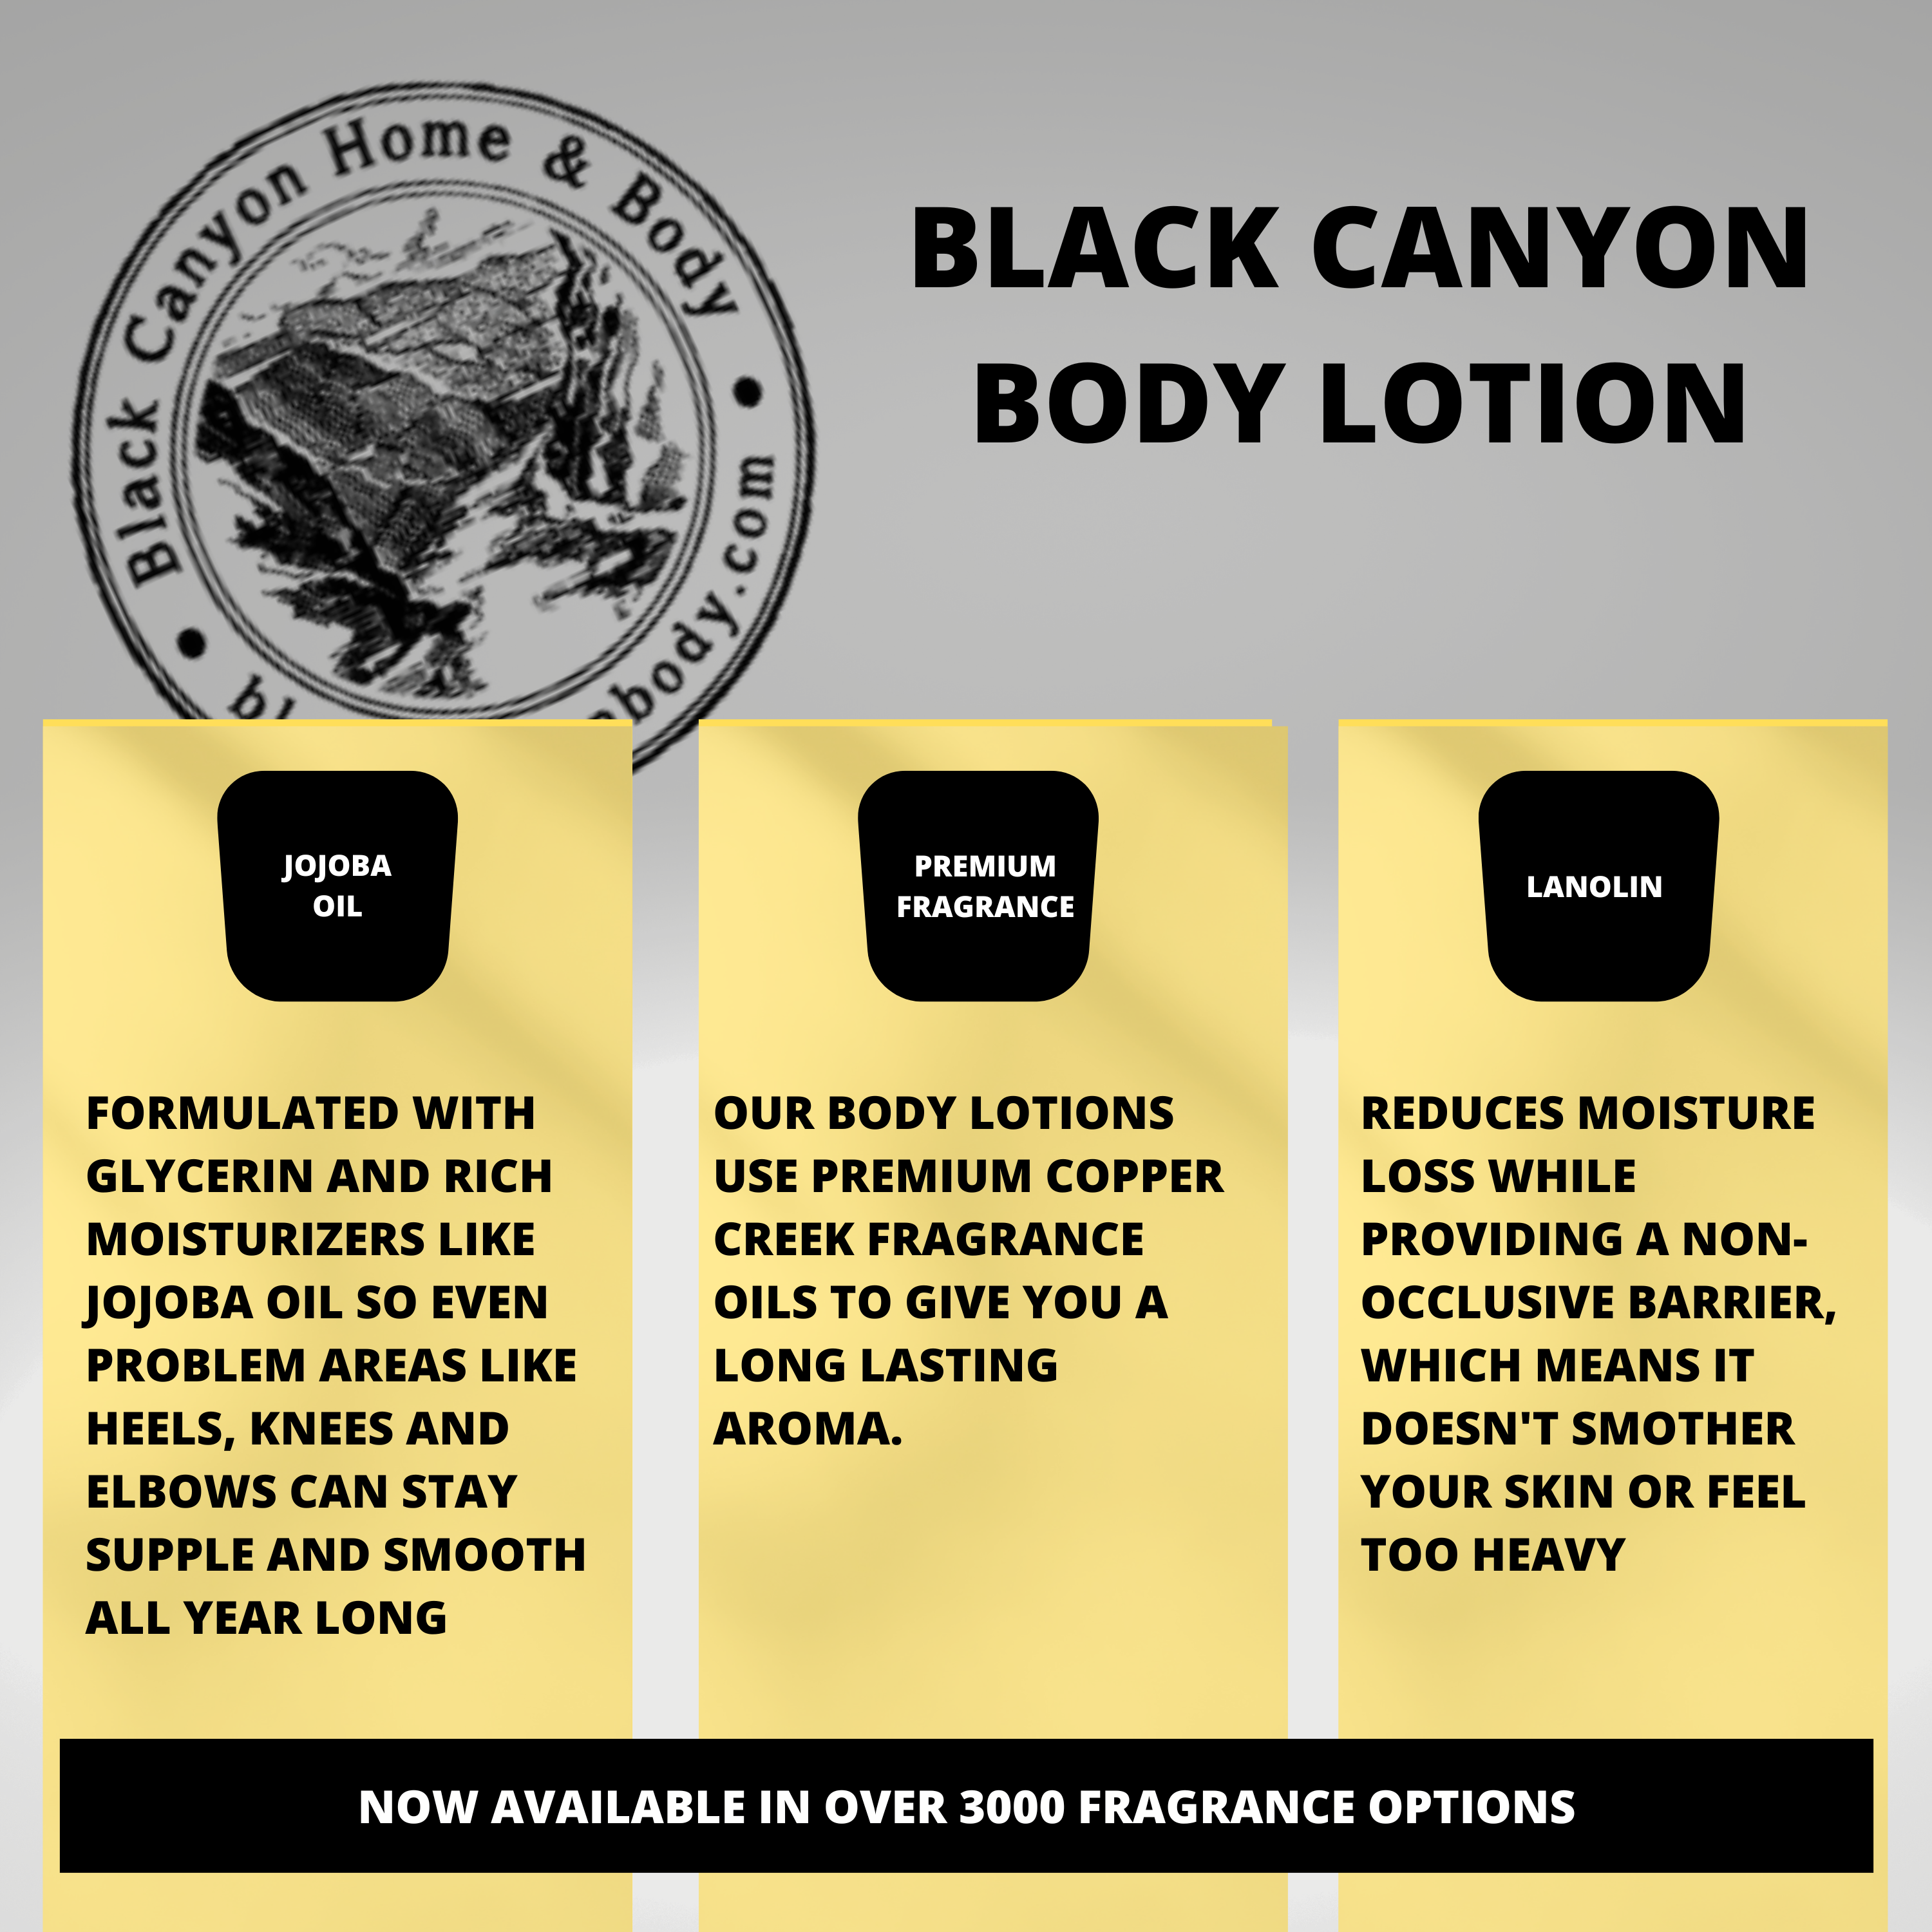 Black Canyon Bamboo & Tea Scented Luxury Body Lotion with Lanolin and Jojoba Oil